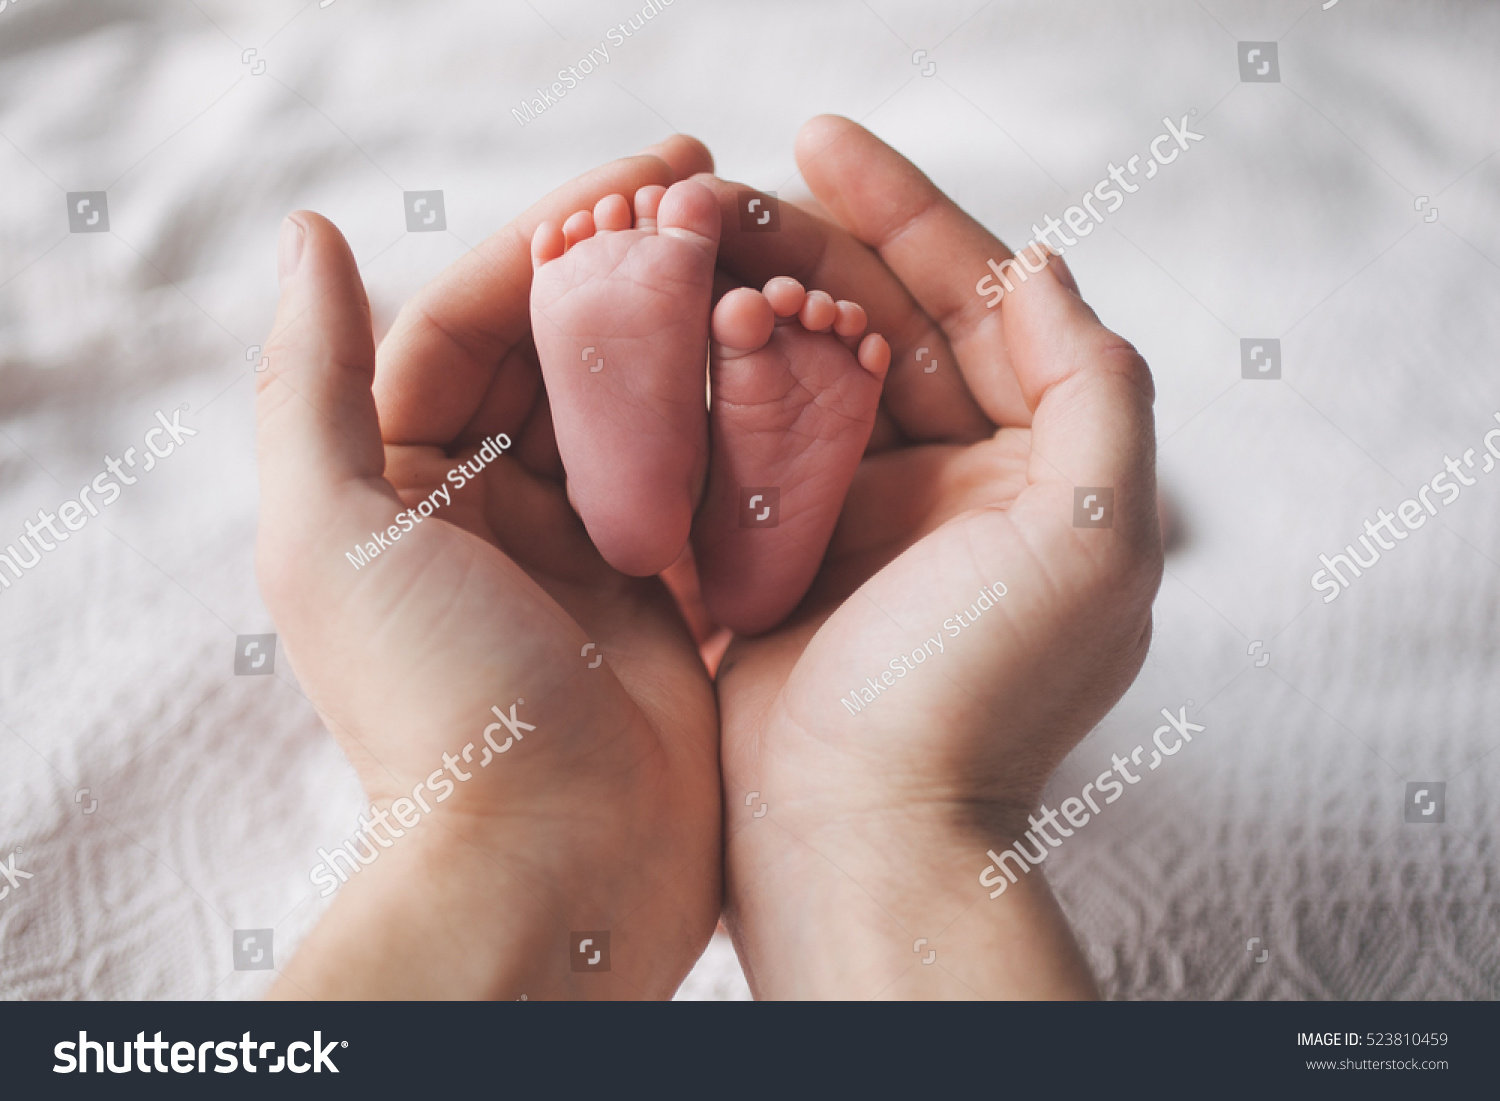 Parent holding in the hands feet of newborn baby. #523810459